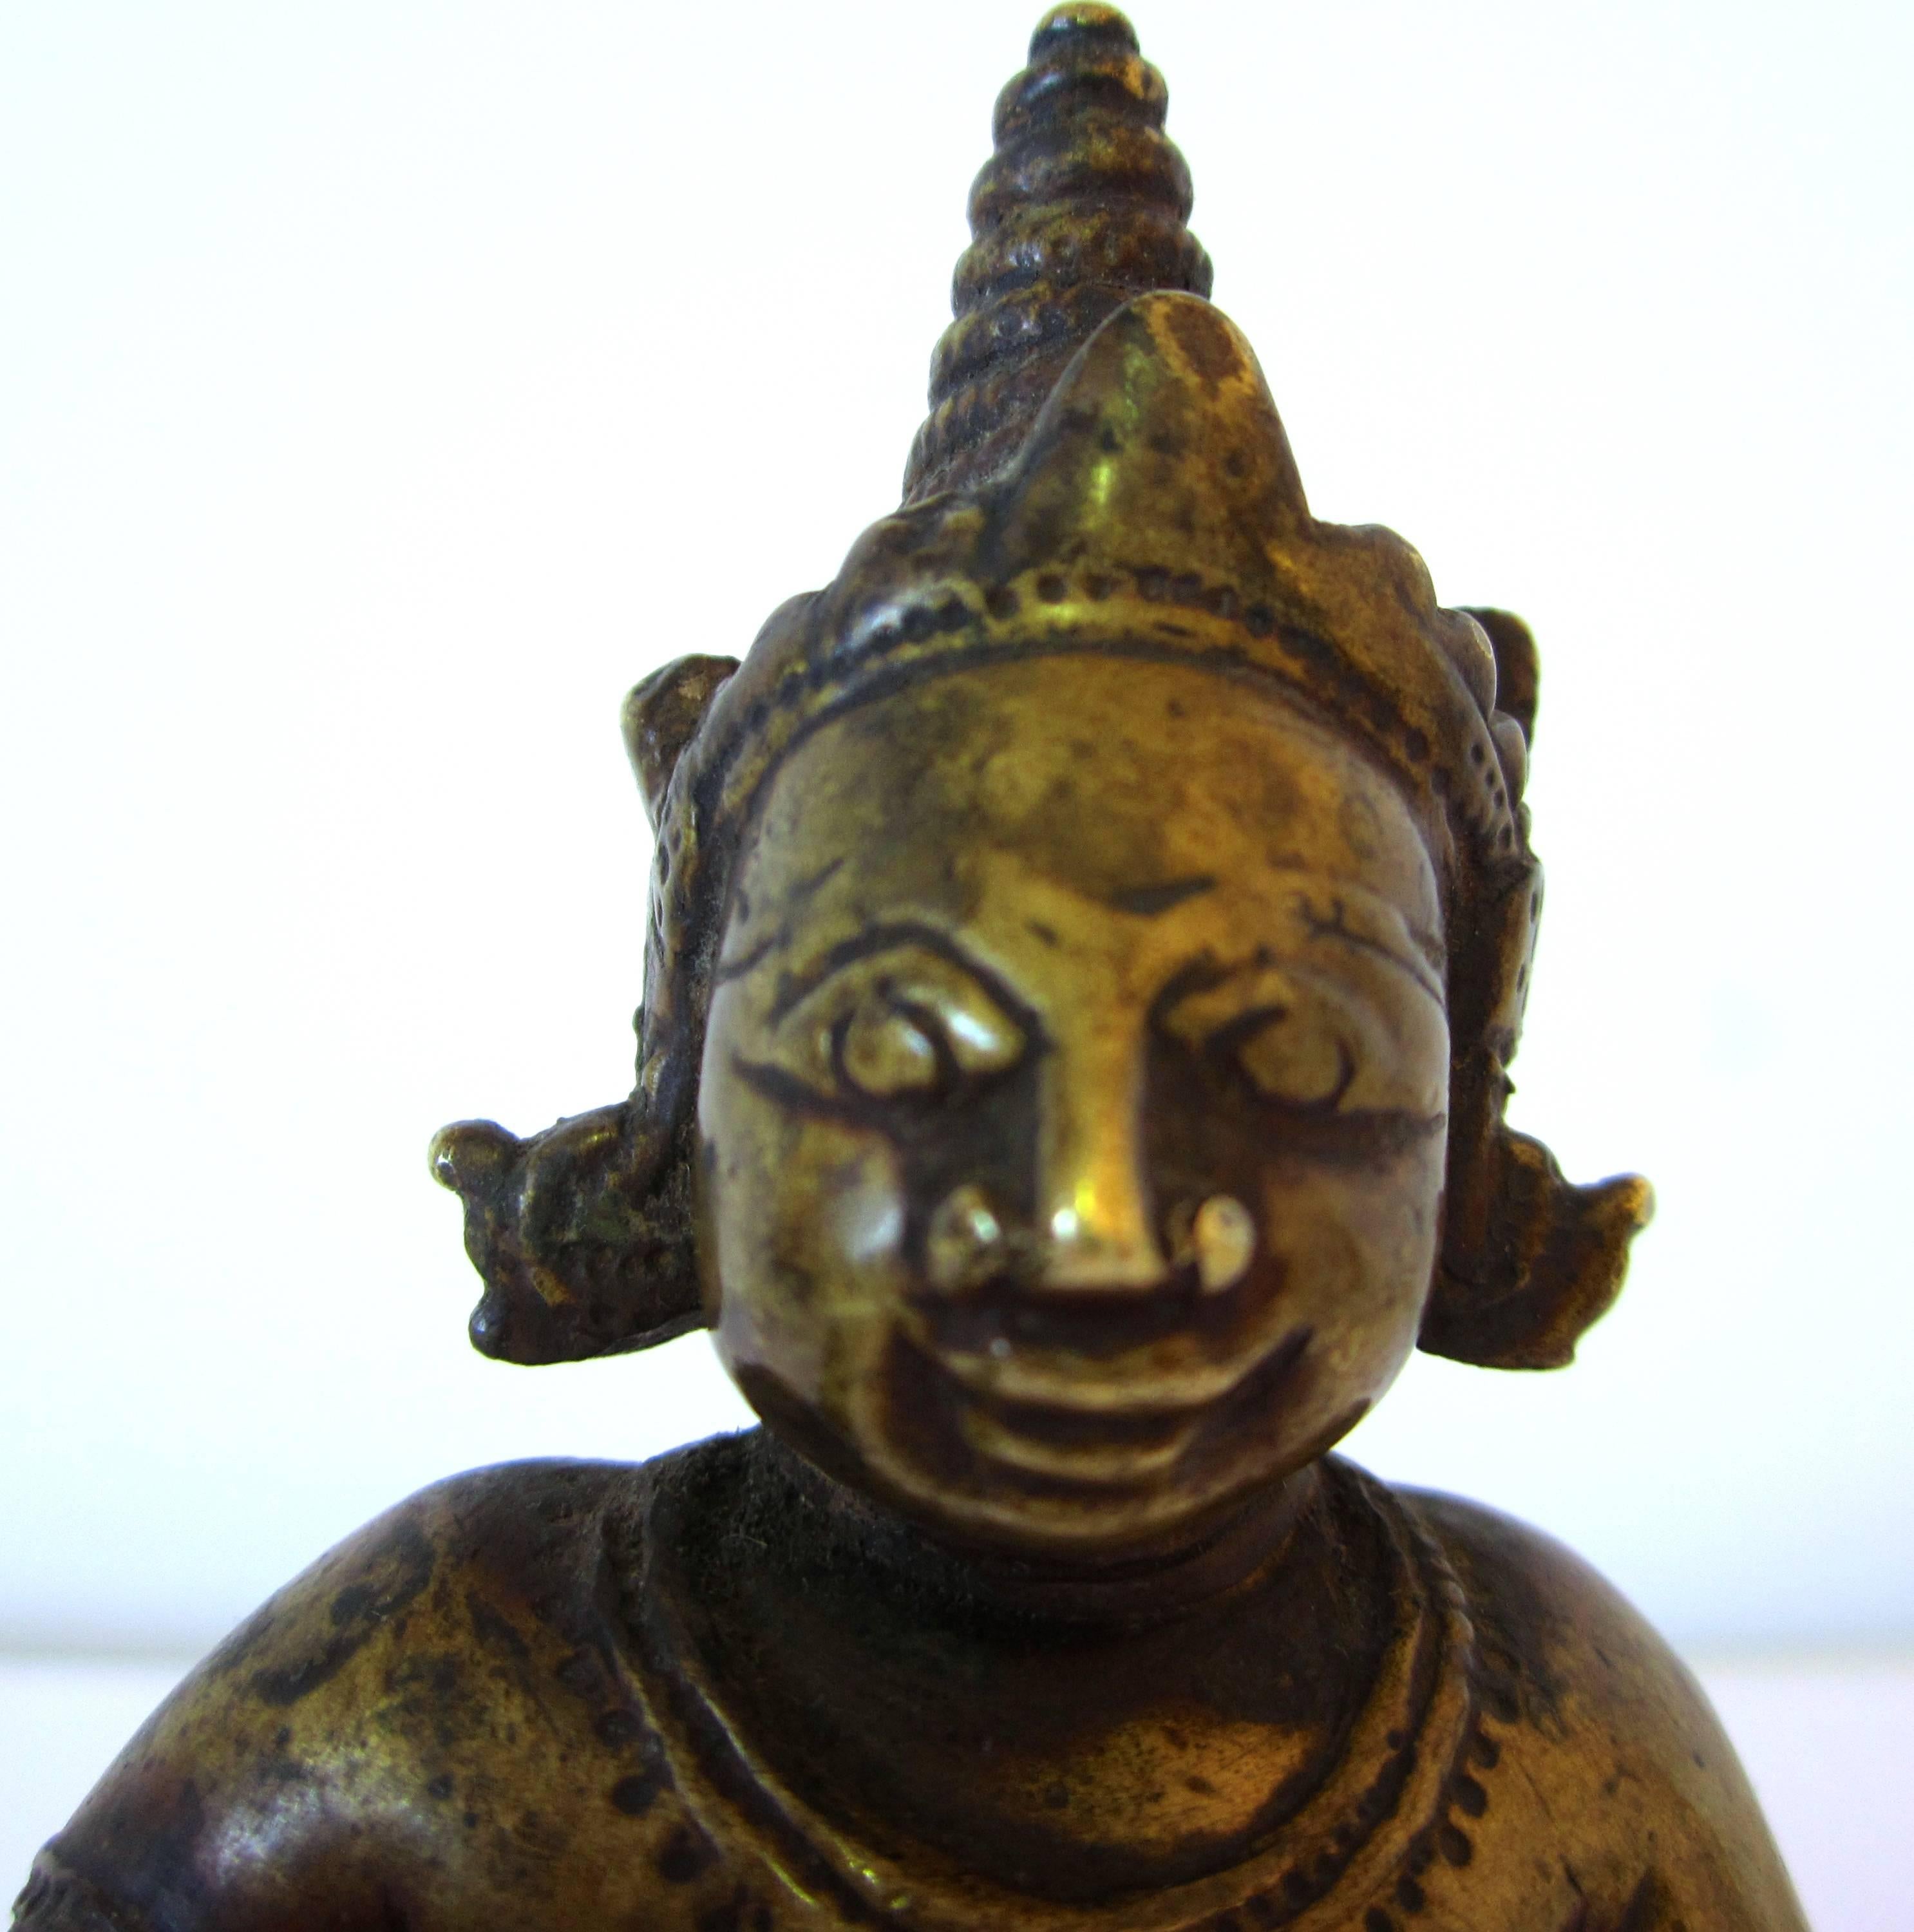 Indian bronze figure of baby Krishna as "Butter Thief," holding the butter ball he stole from his stepmother. Wearing jewelry and a crown, Orissa, 17th century.